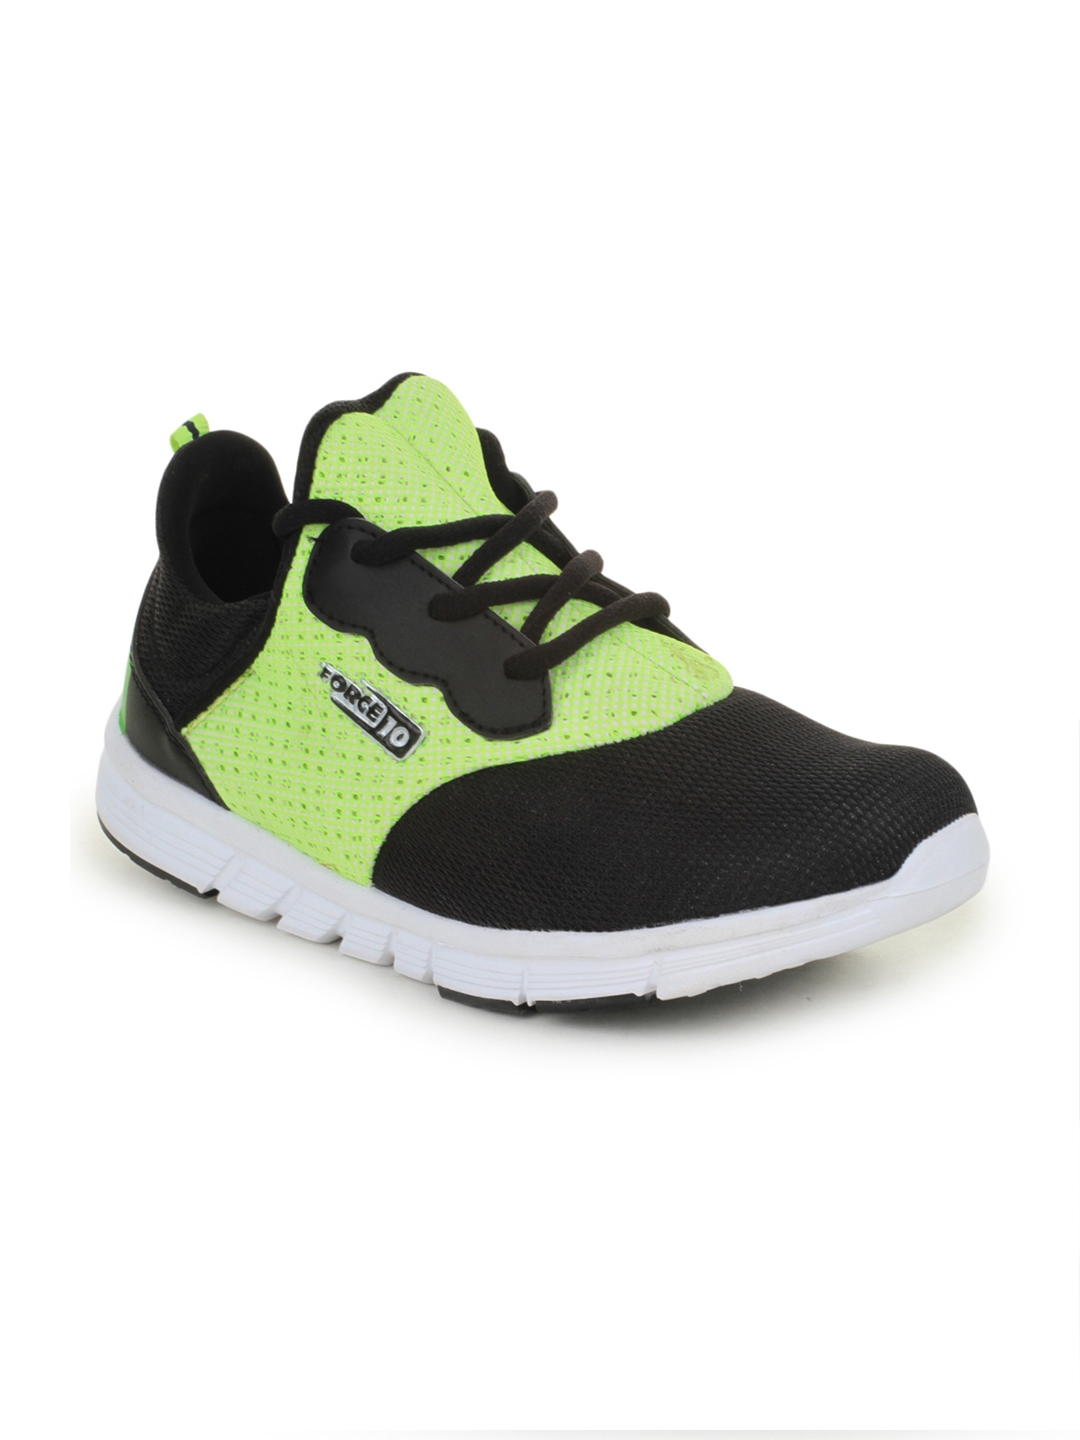 liberty sports shoes for ladies